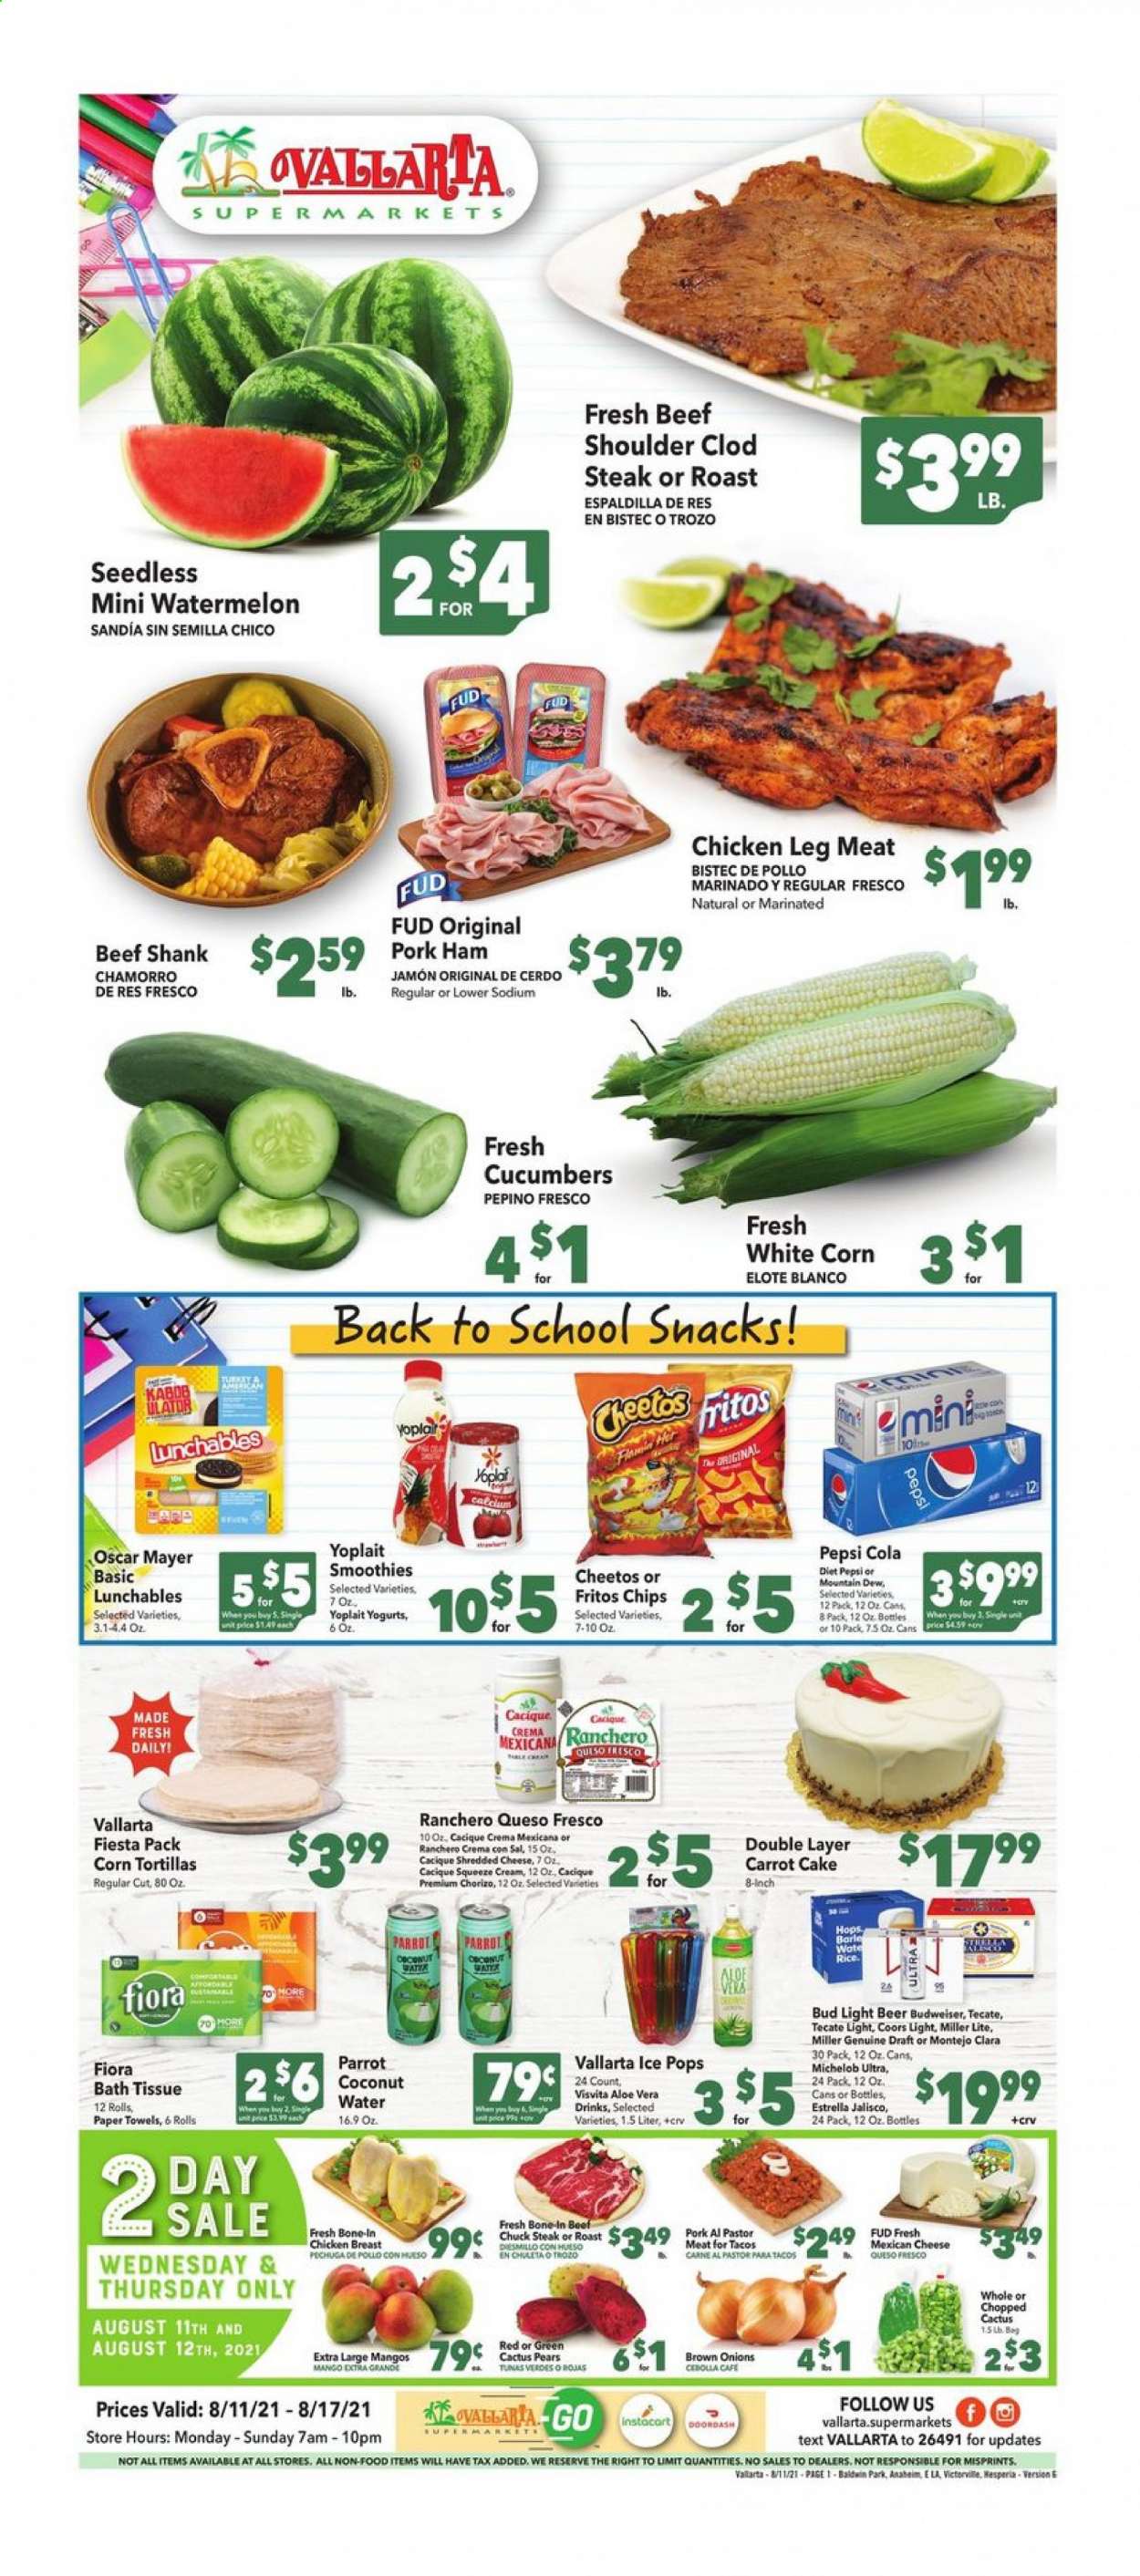 thumbnail - Vallarta Flyer - 08/11/2021 - 08/17/2021 - Sales products - Budweiser, Miller Lite, Coors, Michelob, corn tortillas, tortillas, cake, cucumber, watermelon, pears, chicken breasts, chicken legs, beef meat, beef shank, steak, chuck steak, Lunchables, ham, chorizo, Oscar Mayer, shredded cheese, queso fresco, Yoplait, snack, Fritos, Cheetos, chips, rice, Mountain Dew, Pepsi, Diet Pepsi, coconut water, smoothie, beer, Bud Light, bath tissue, kitchen towels, paper towels, cactus. Page 1.